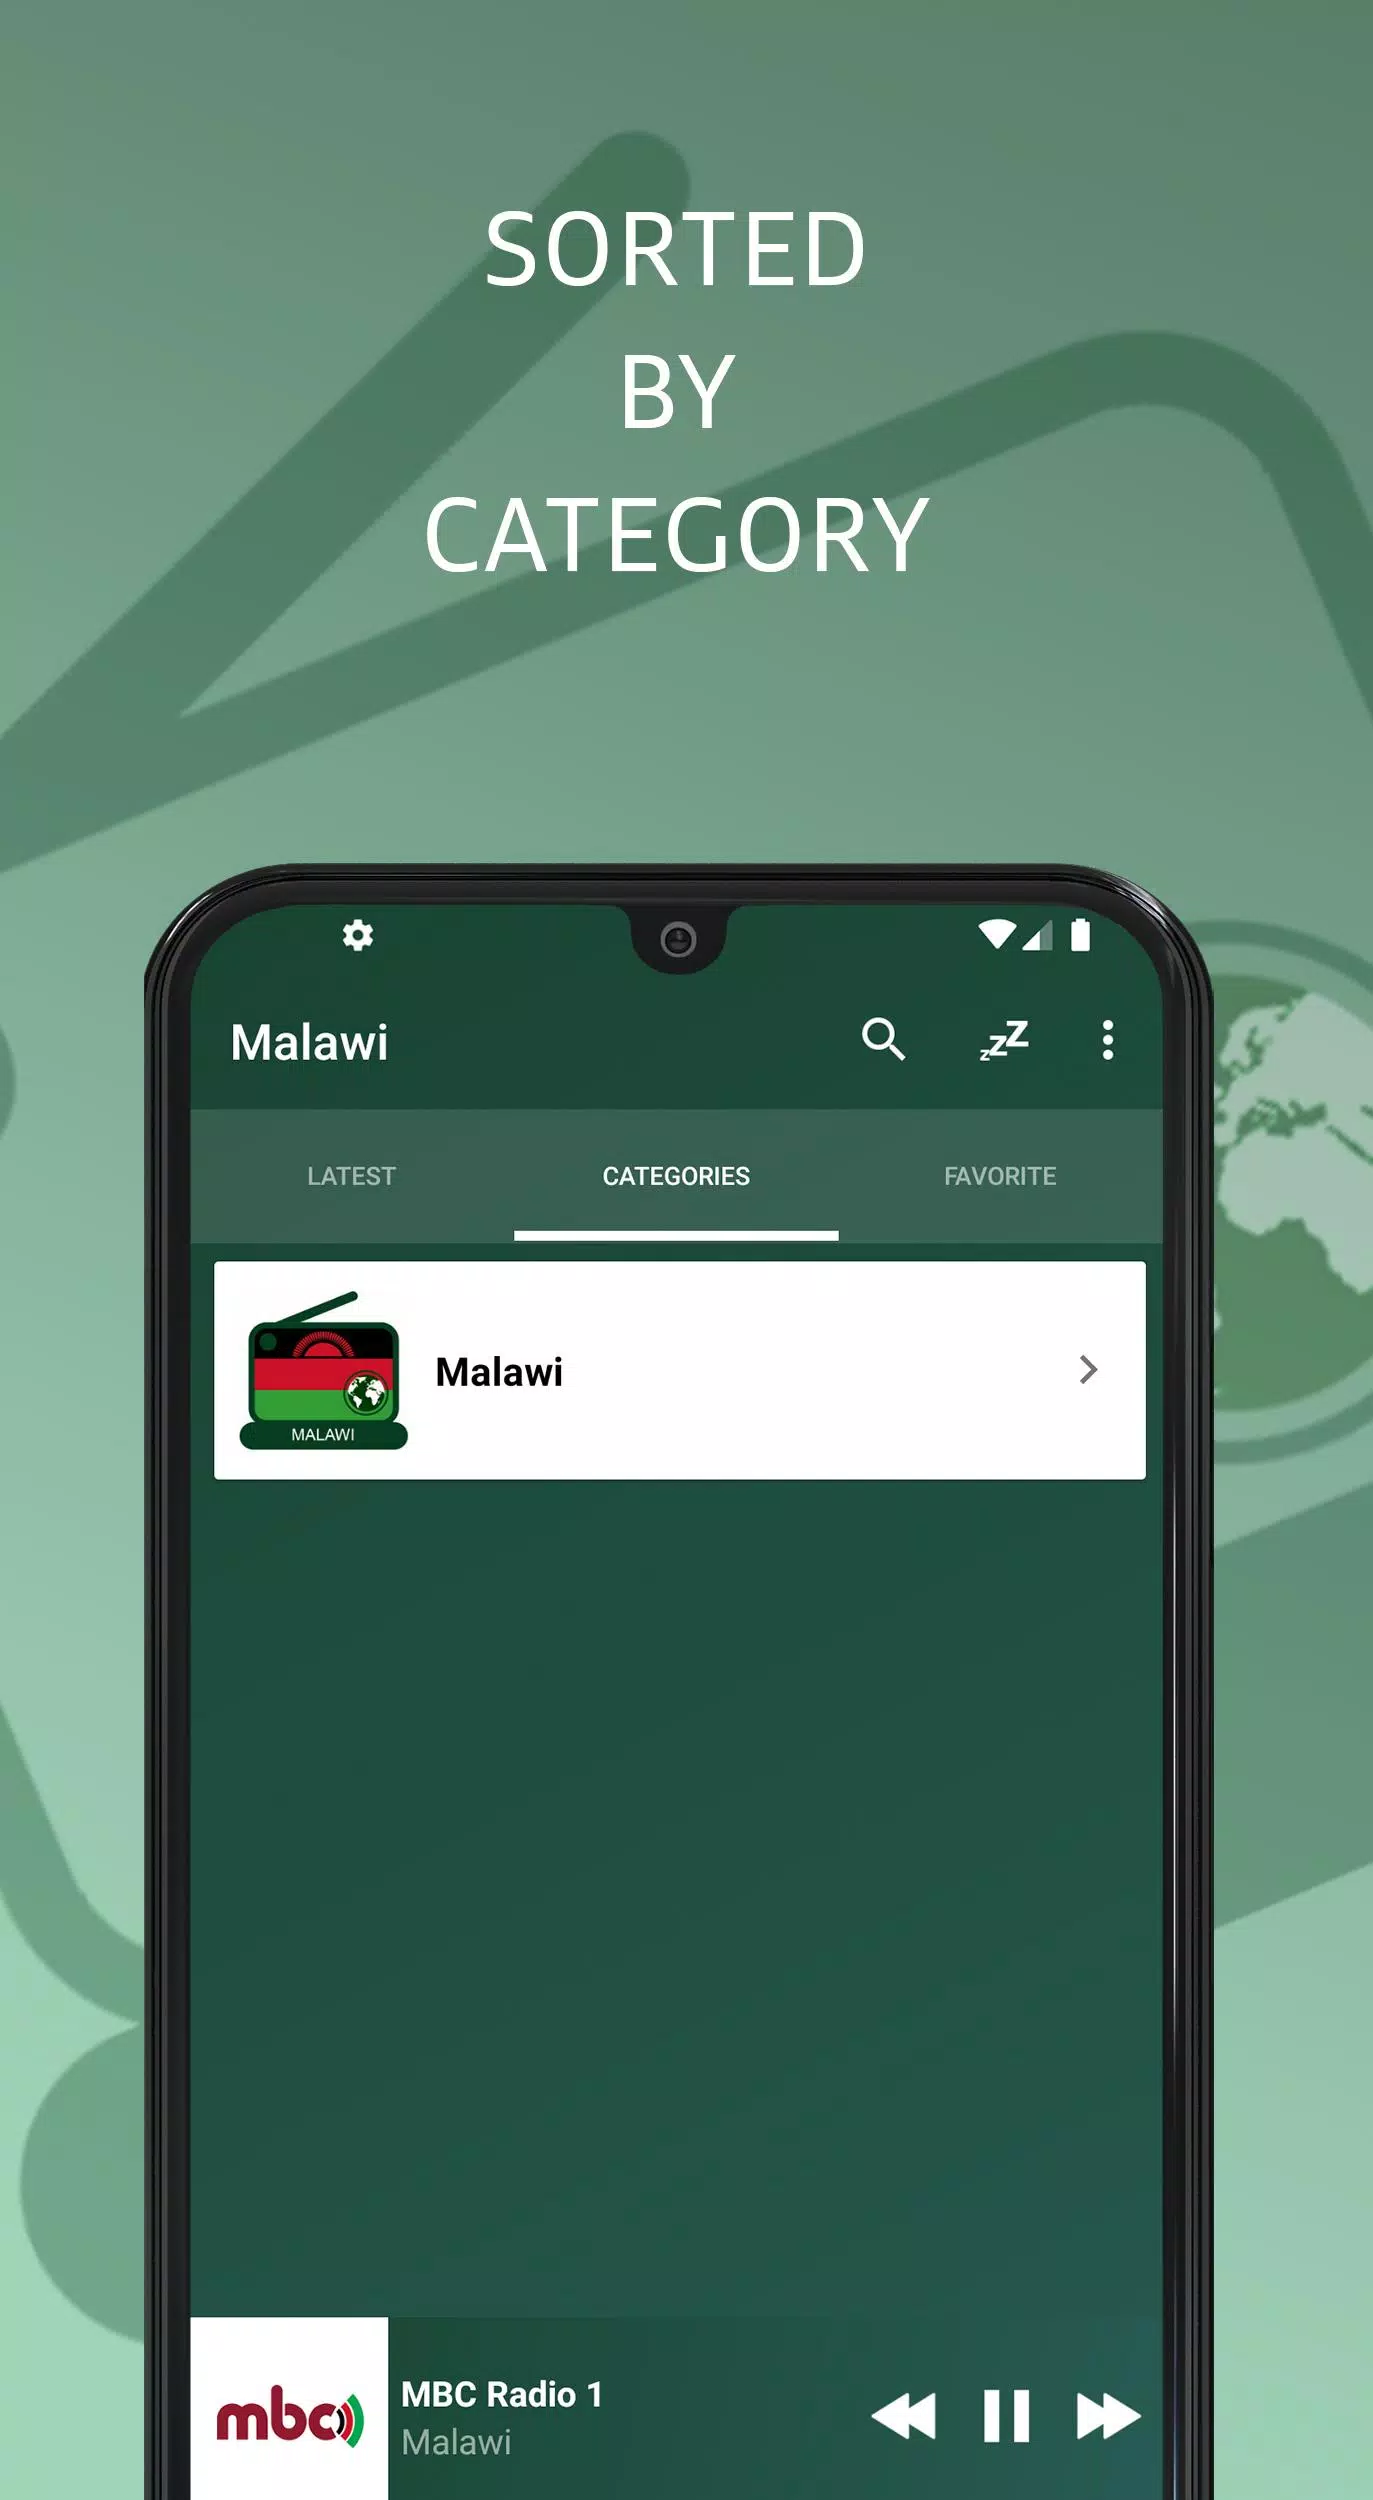 Download do APK de Malawi Online Radio Stations 🇲🇼 para Android